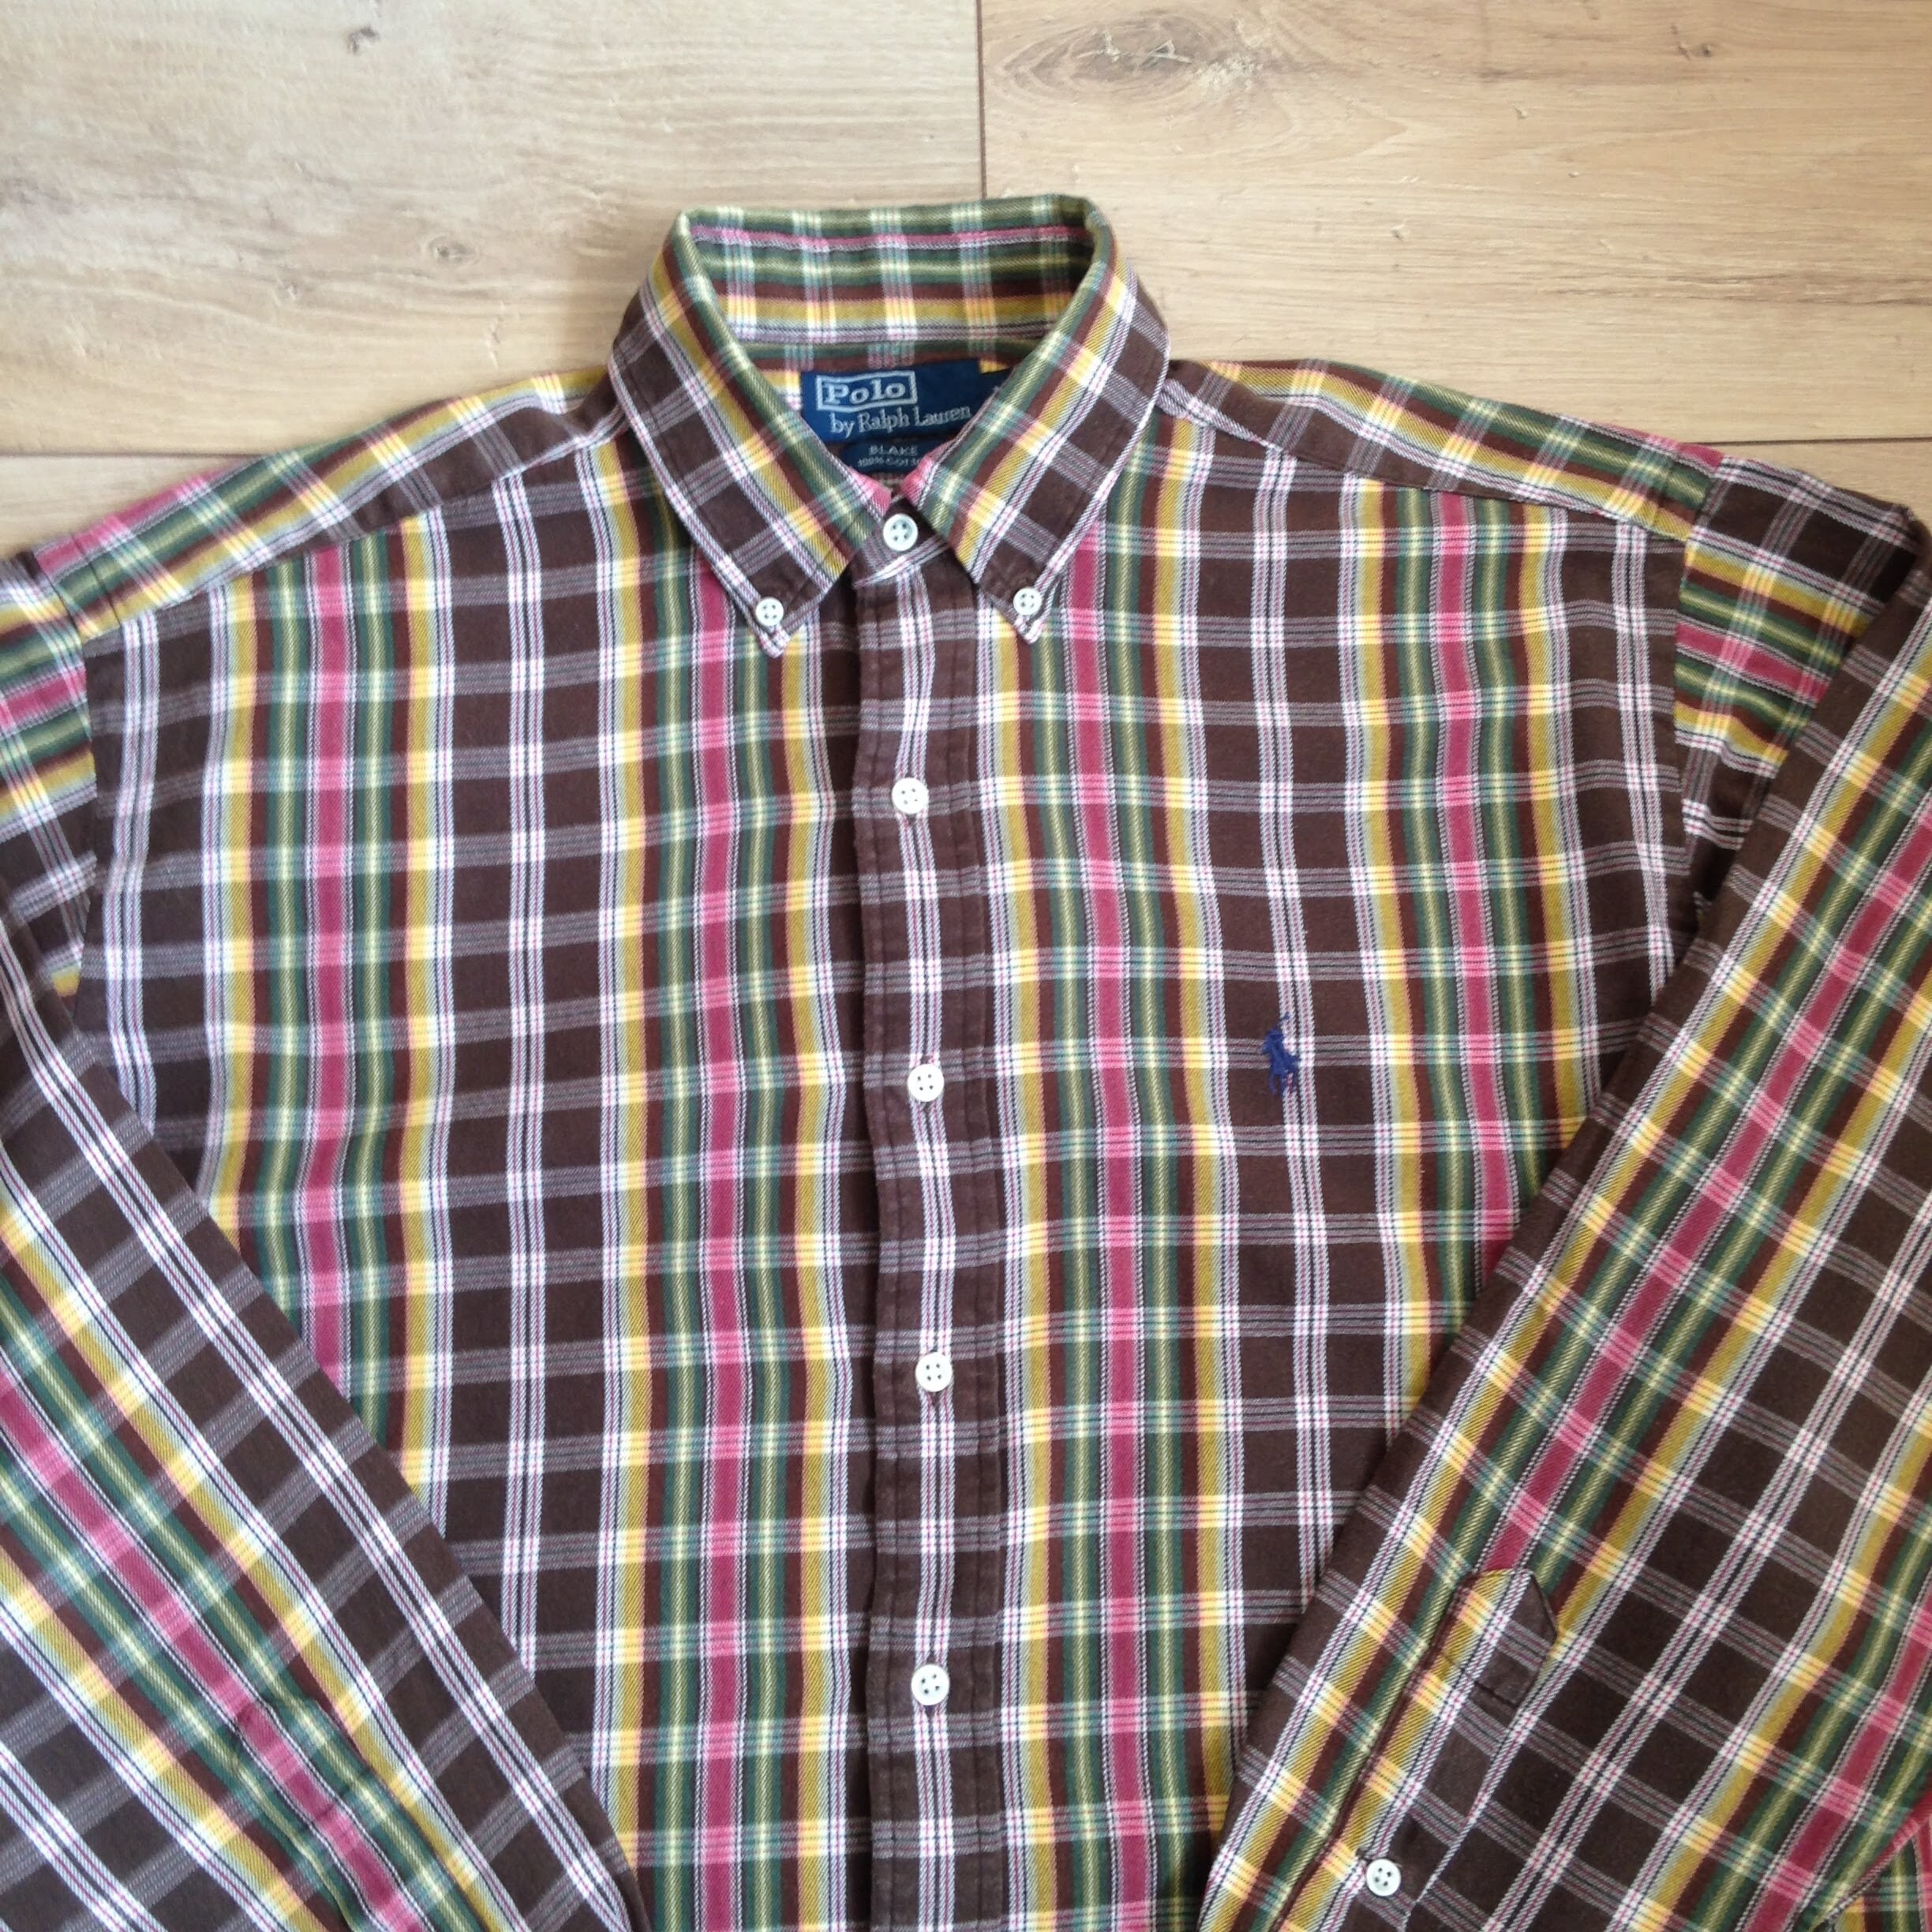 Vintage Polo by Ralph Lauren Checkered Shirt for Men Size M - Etsy UK